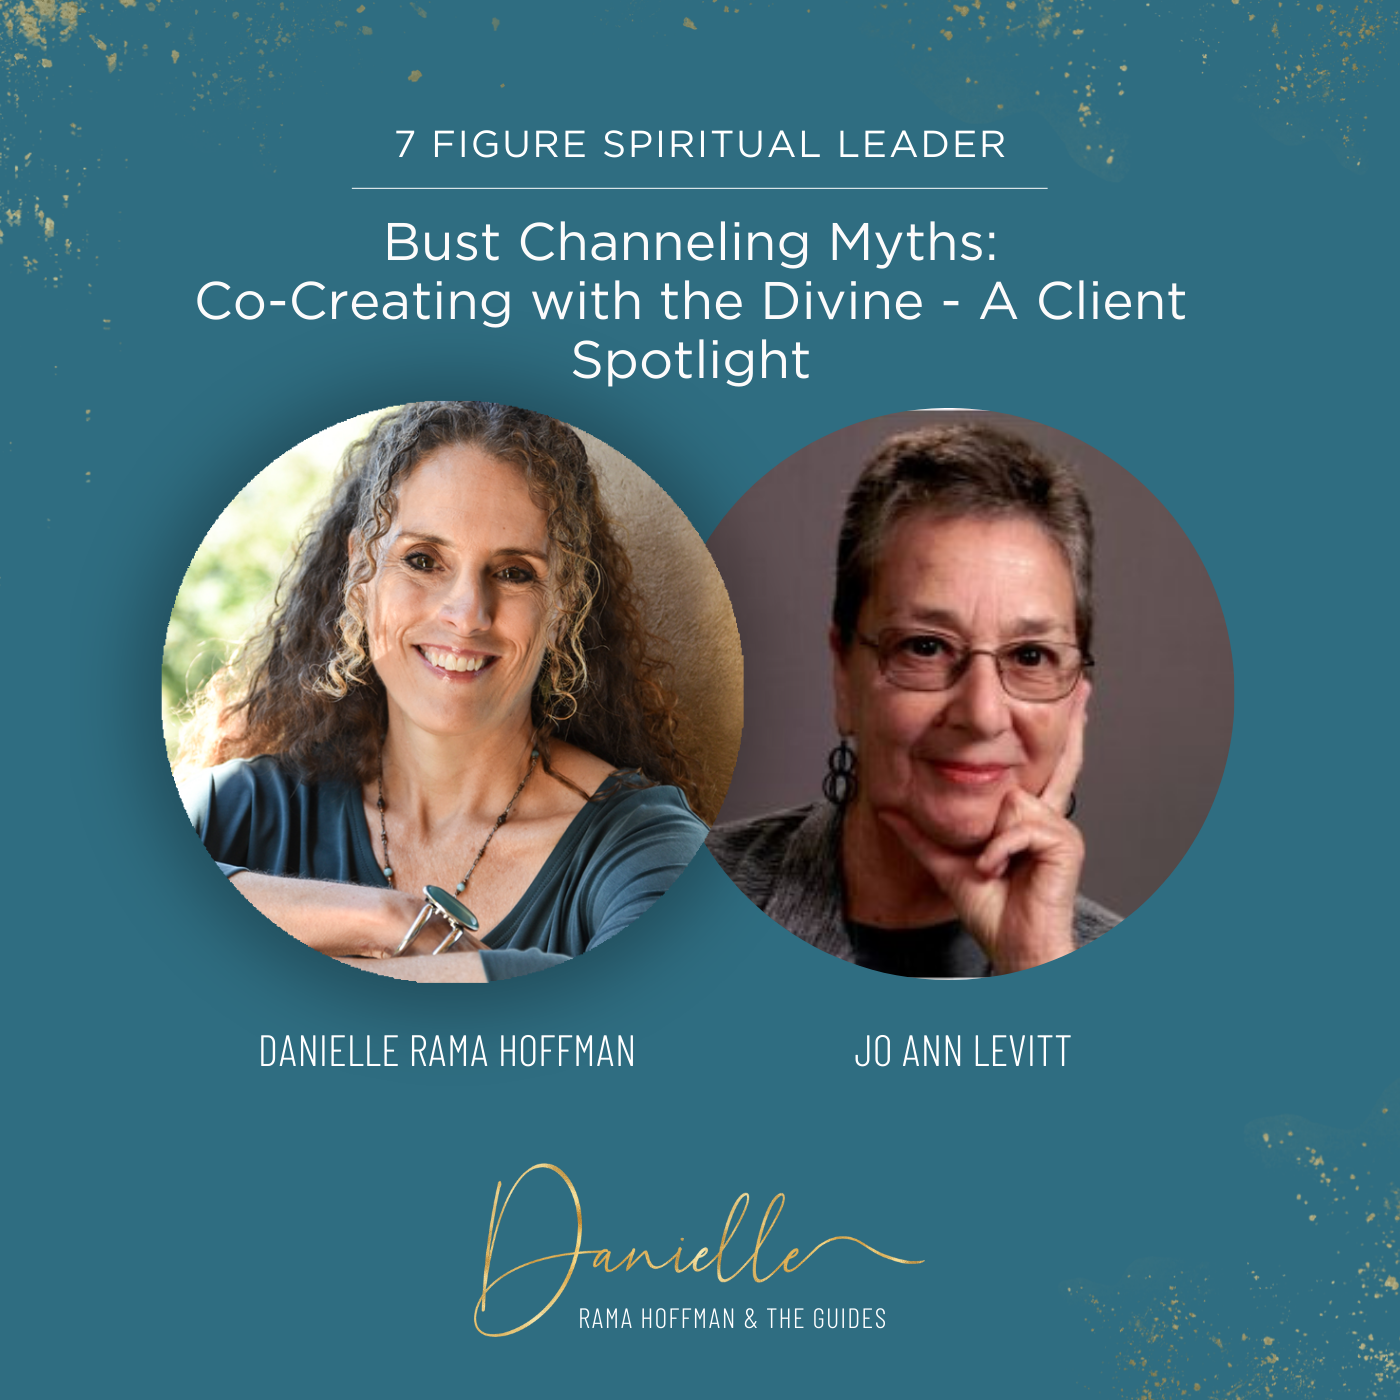 Bust Channeling Myths: Co-Creating with the Divine Jo Ann Levitt – A Client Spotlight